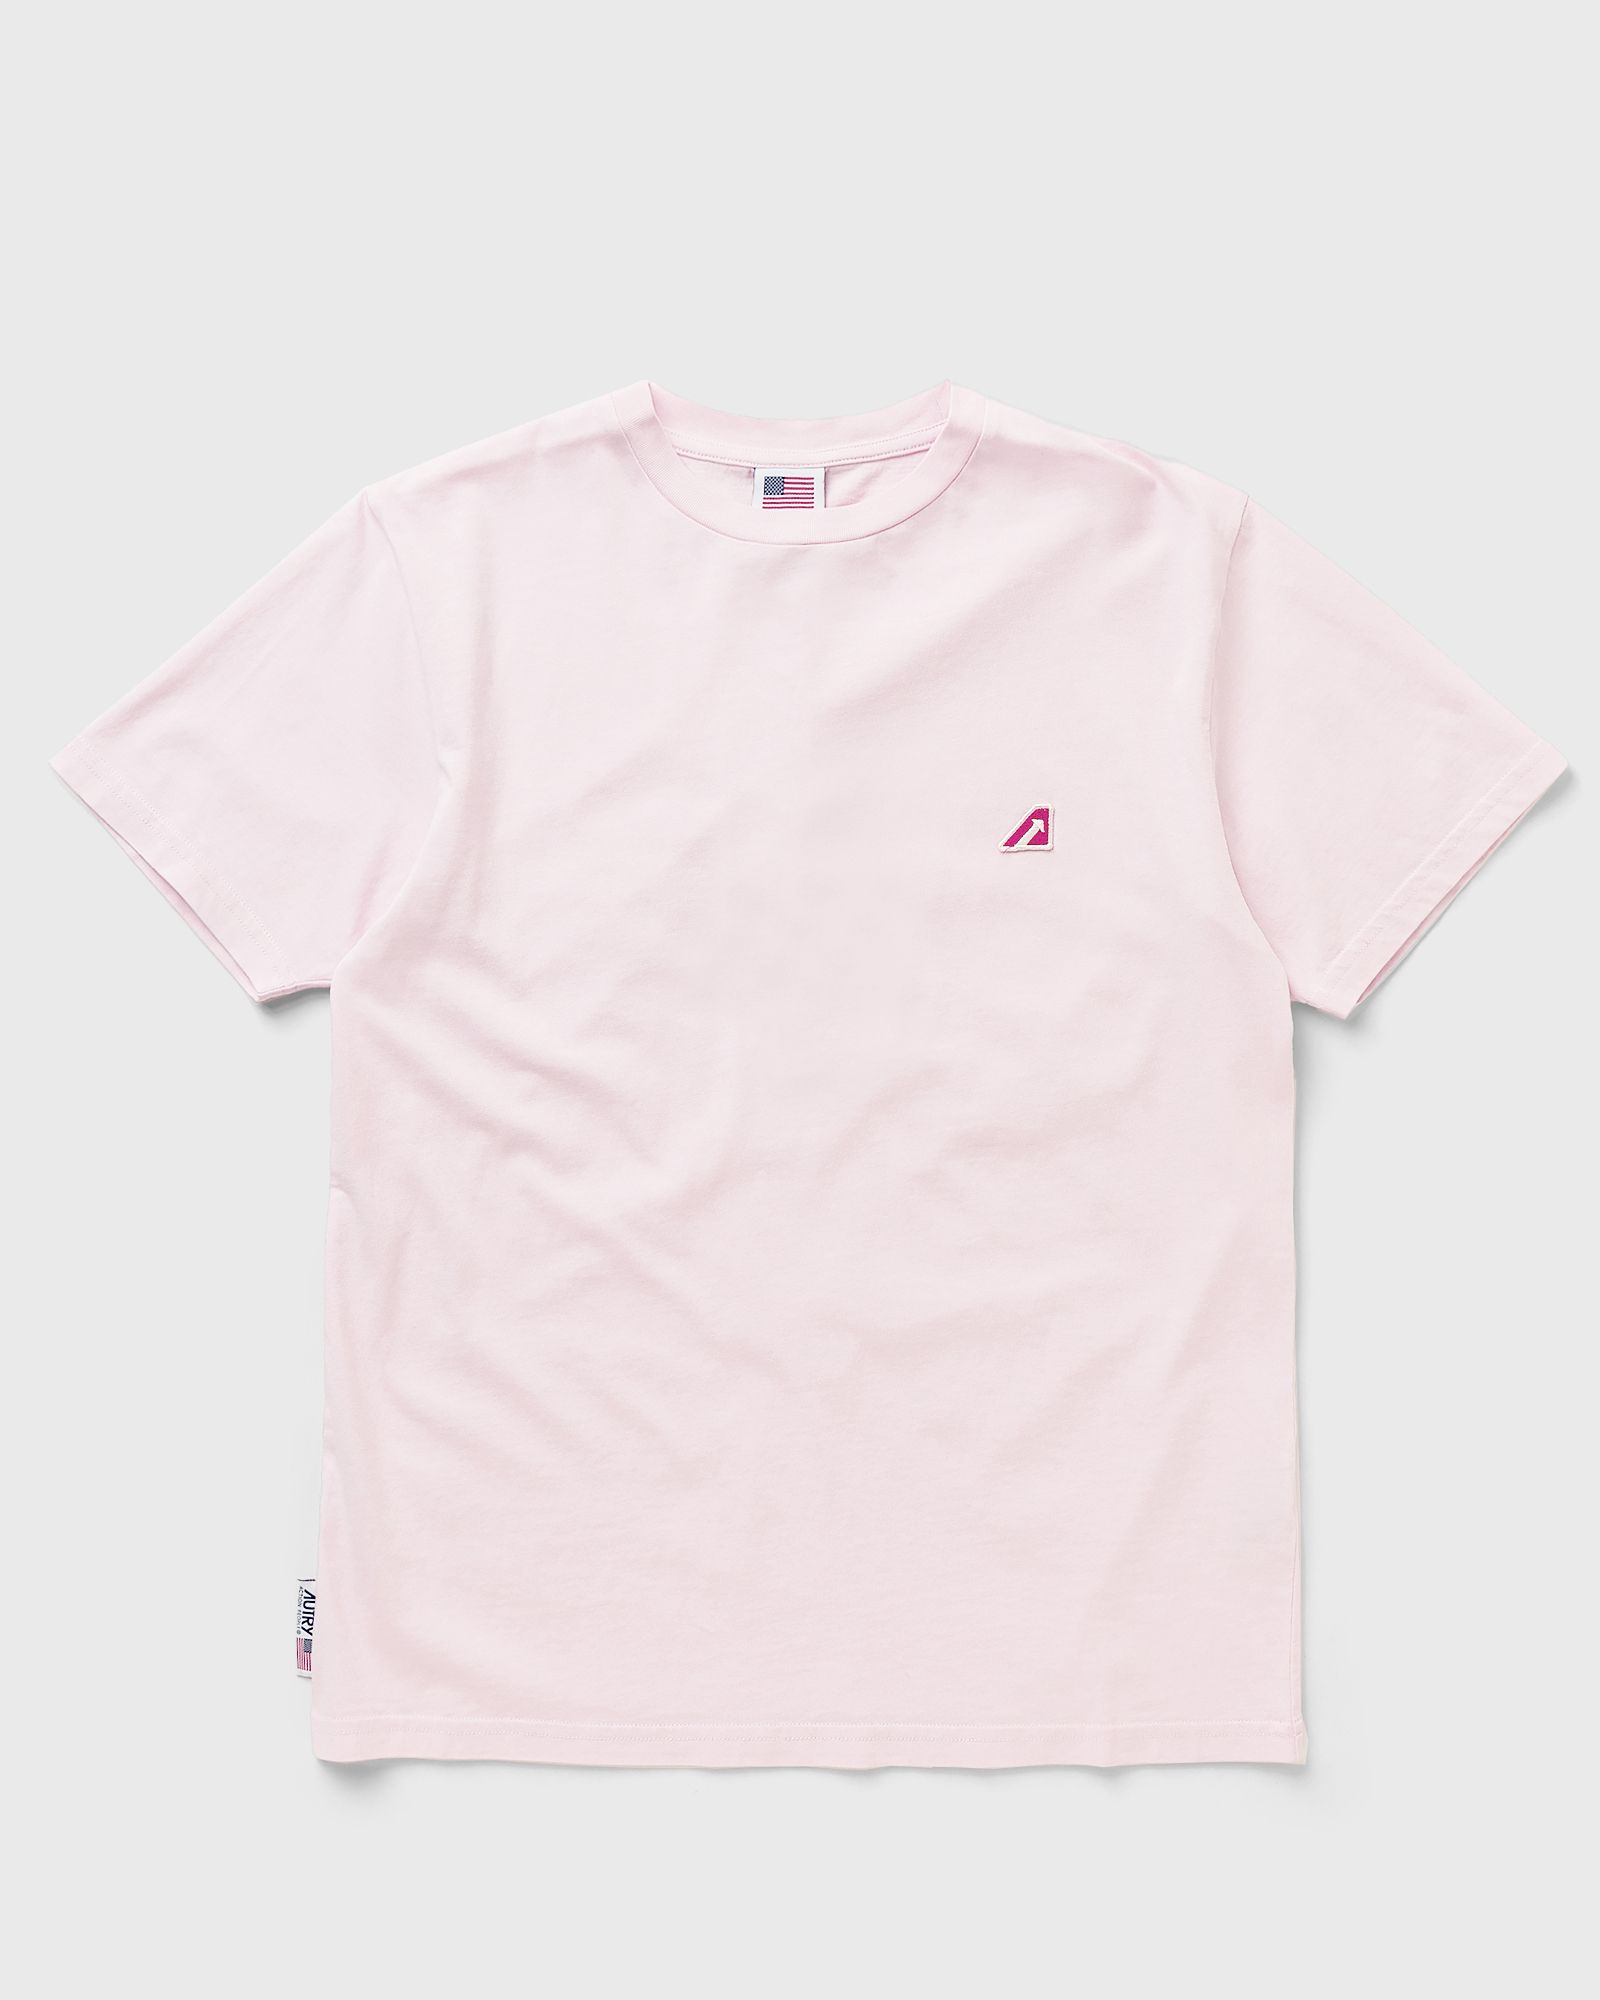 Autry Action Shoes - tee tennis wom women shortsleeves pink in größe:m